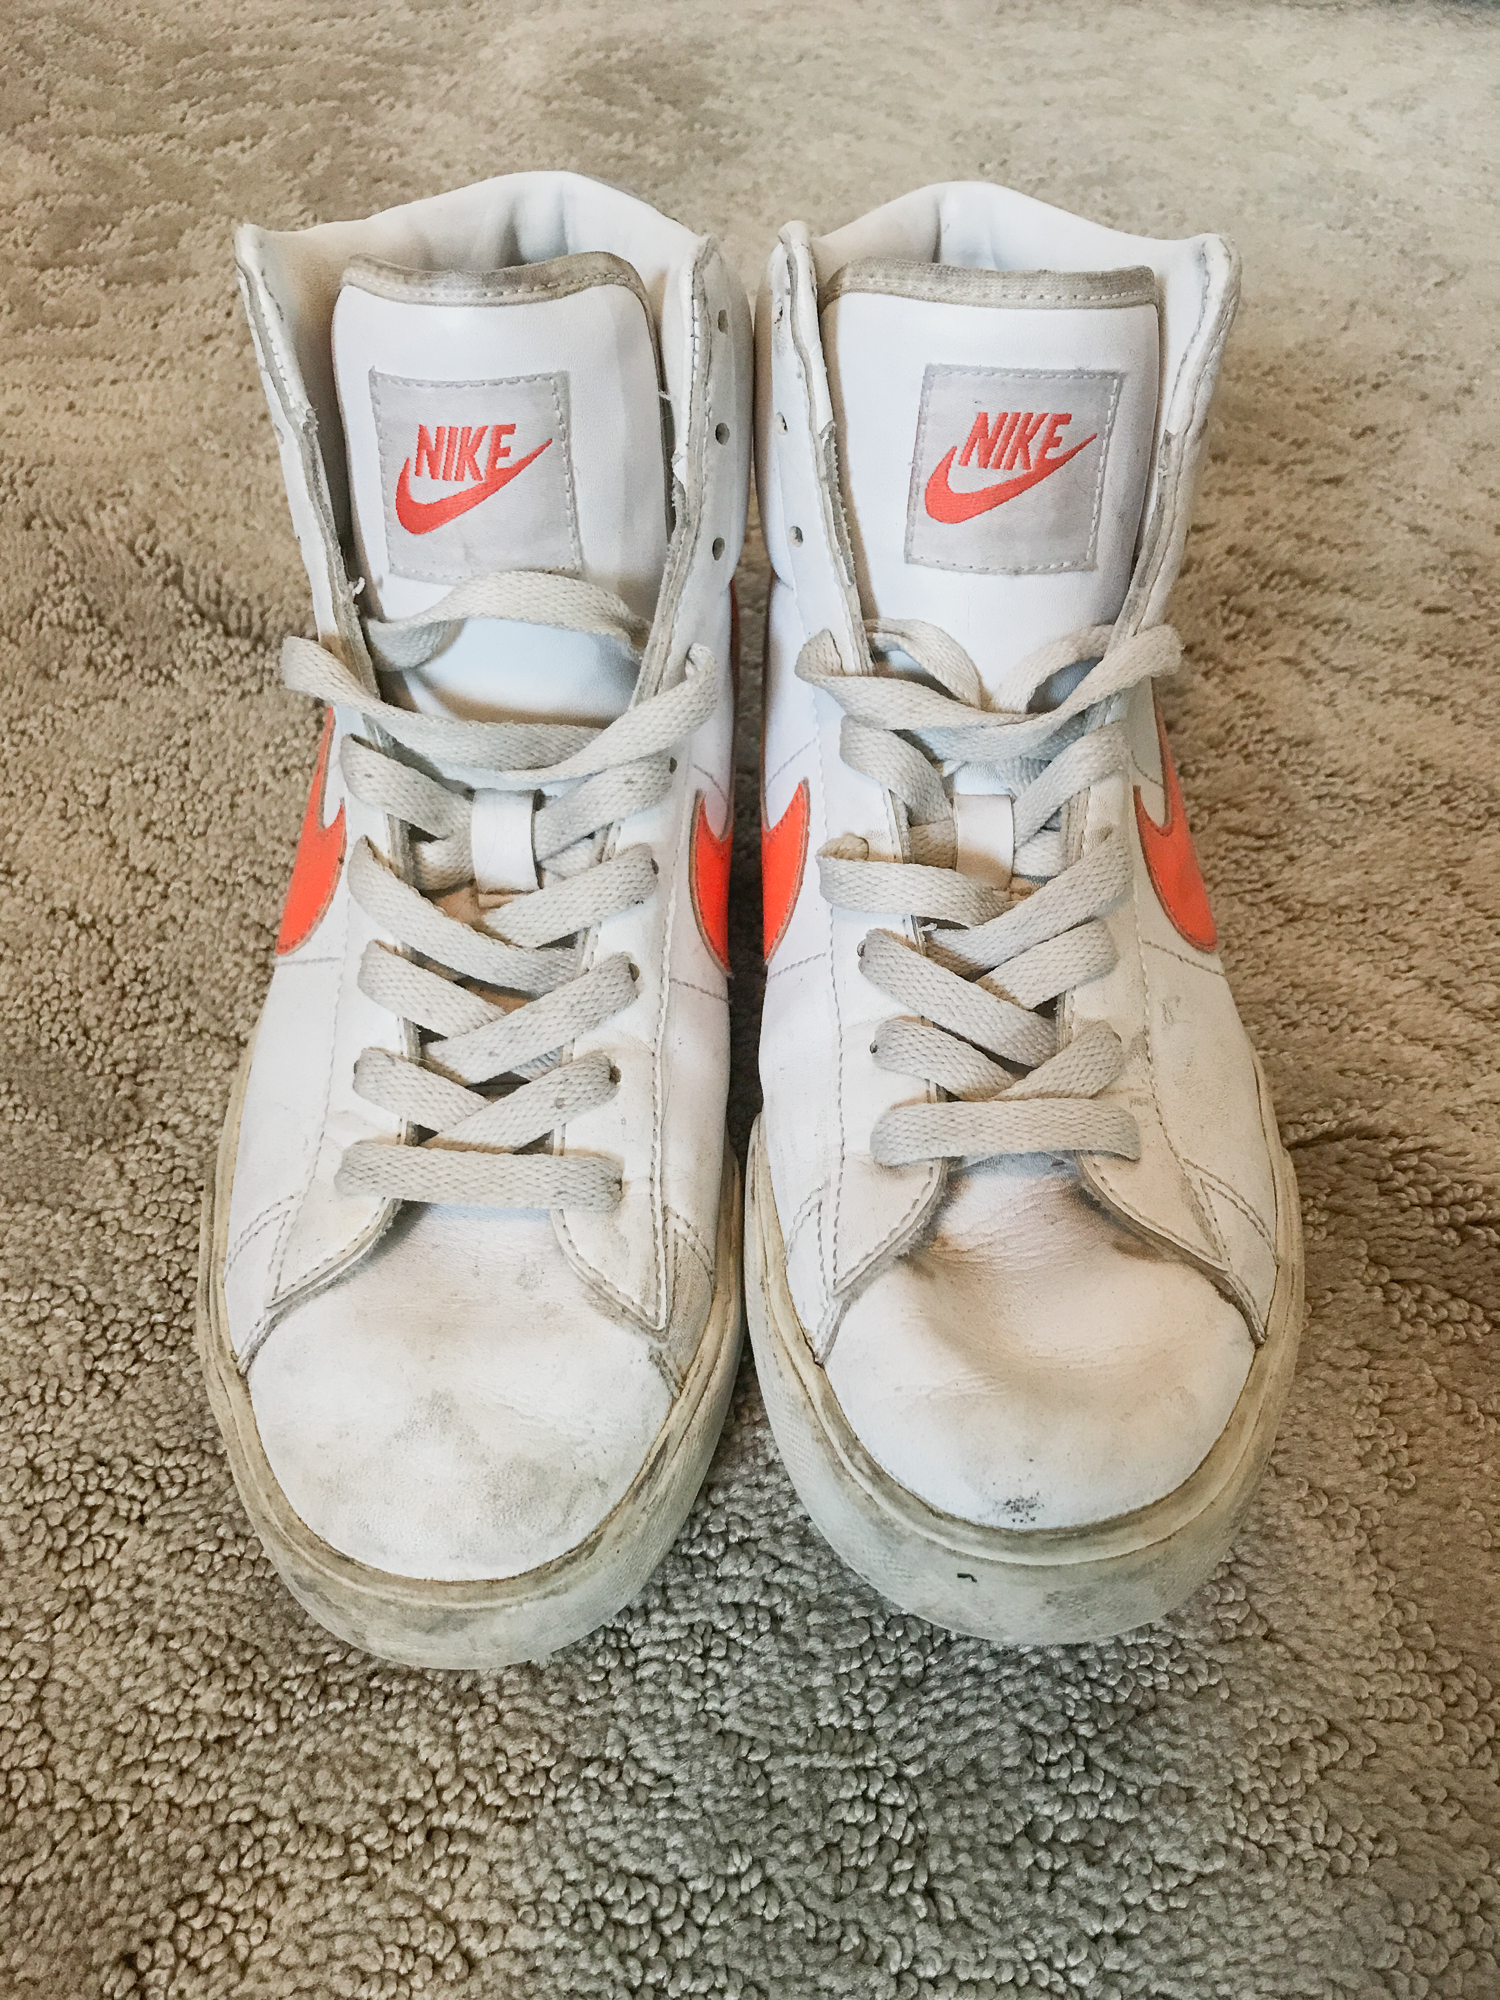 where to buy old nike shoes